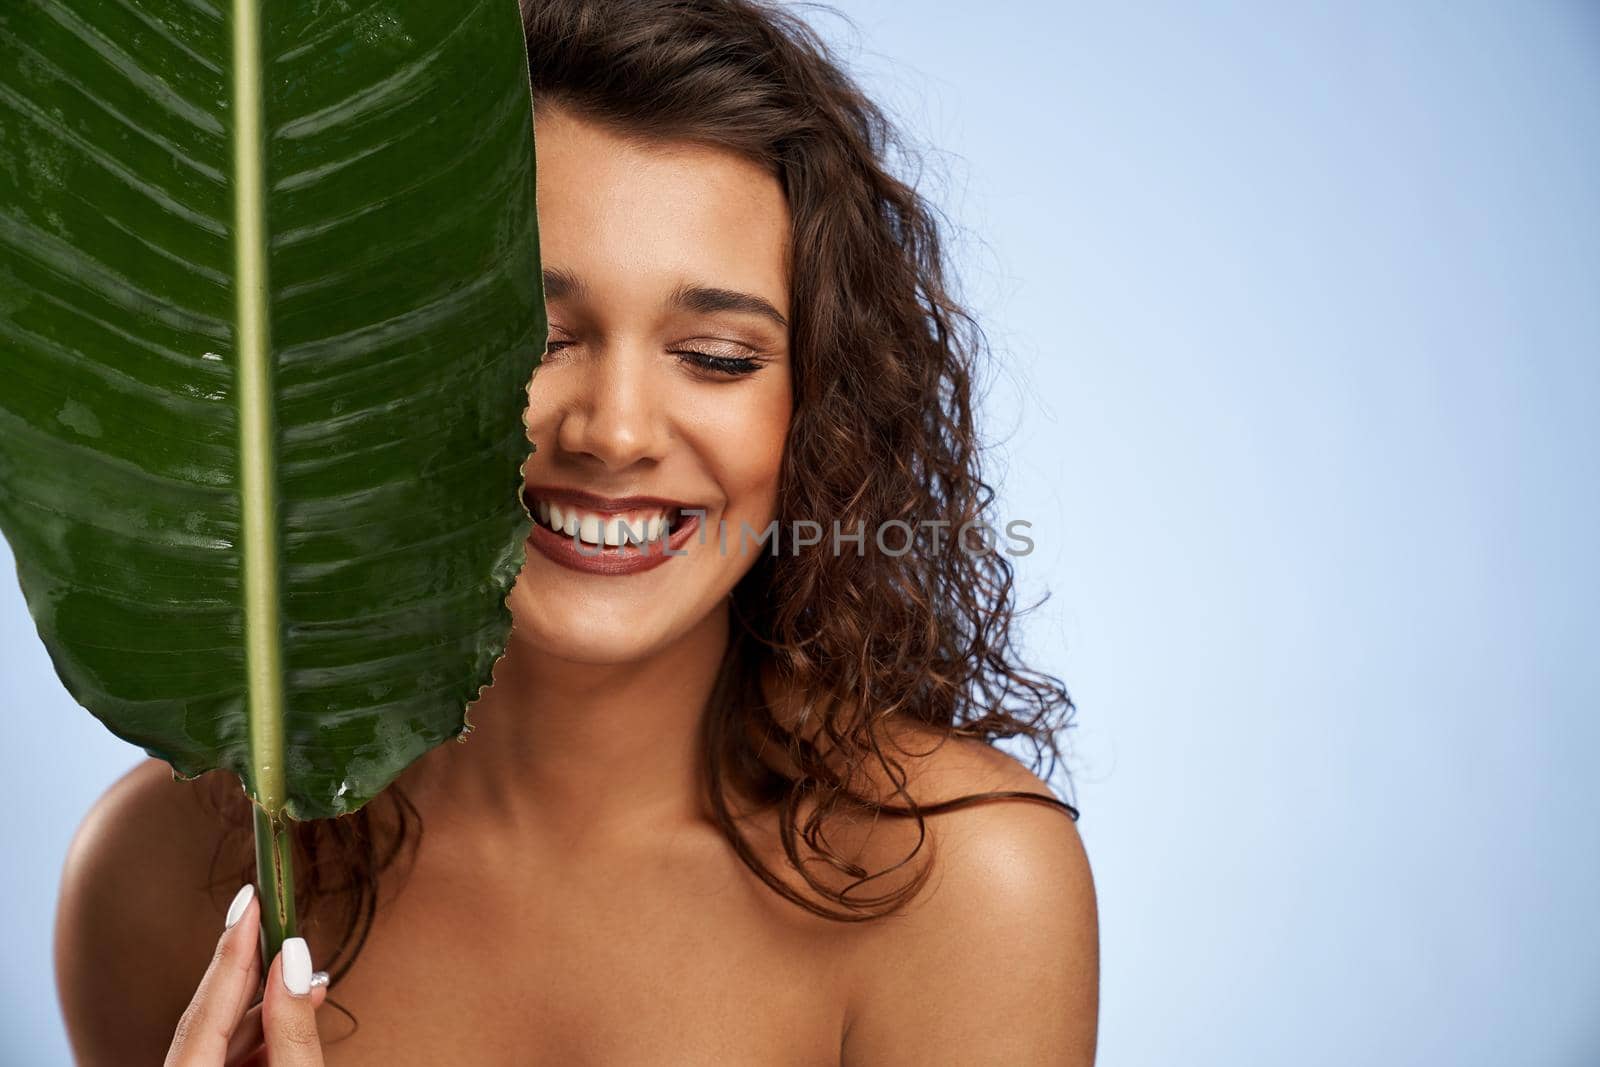 Naked woman laughing, hiding face behind green leaf. by SerhiiBobyk